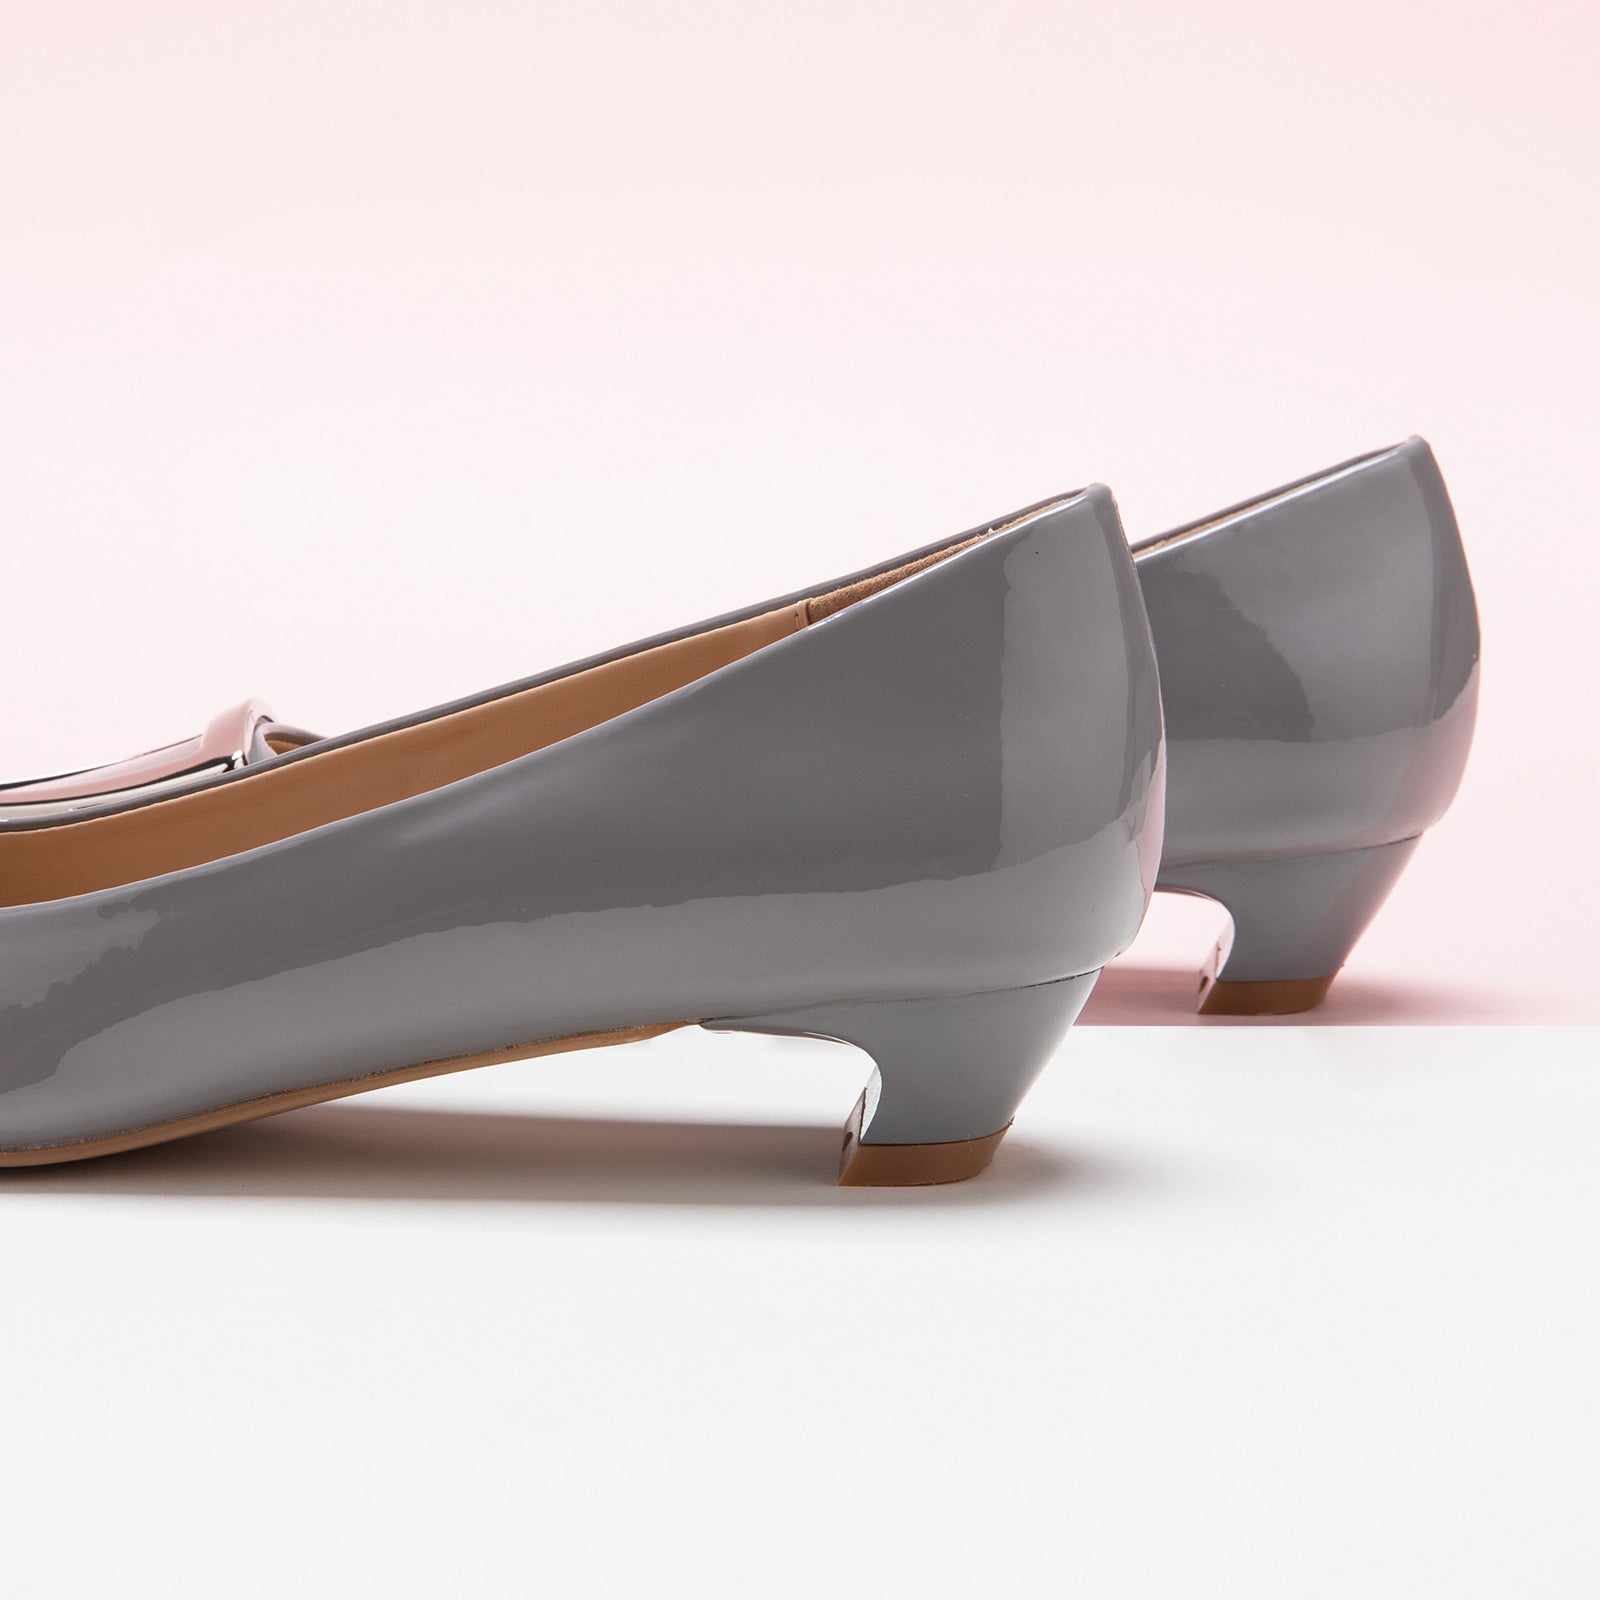 Grey Trapezoidal Buckle Low Heels, perfect for a confident and fashionable look in any urban setting